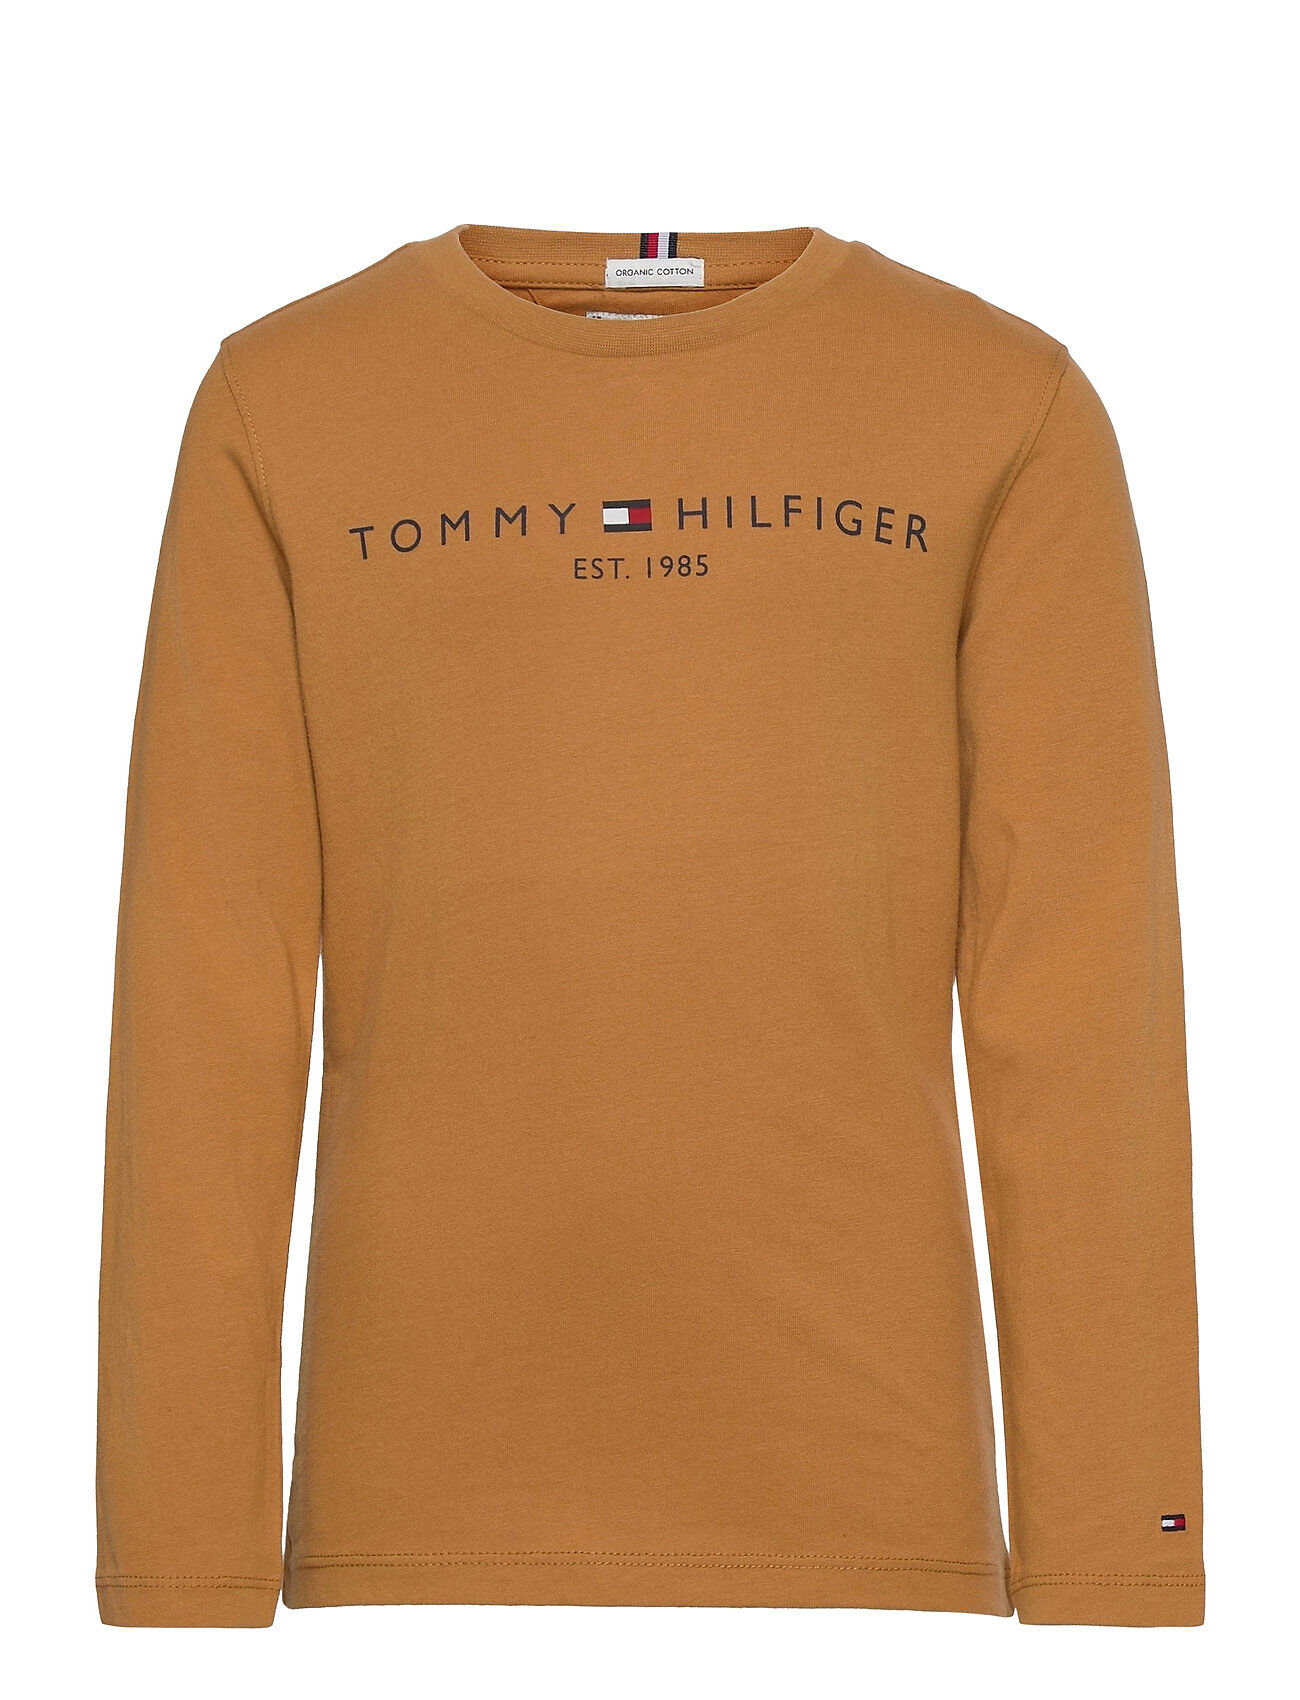 Tommy Hilfiger Essential Tee L/S T-shirts Long-sleeved T-shirts Beige Tommy Hilfiger